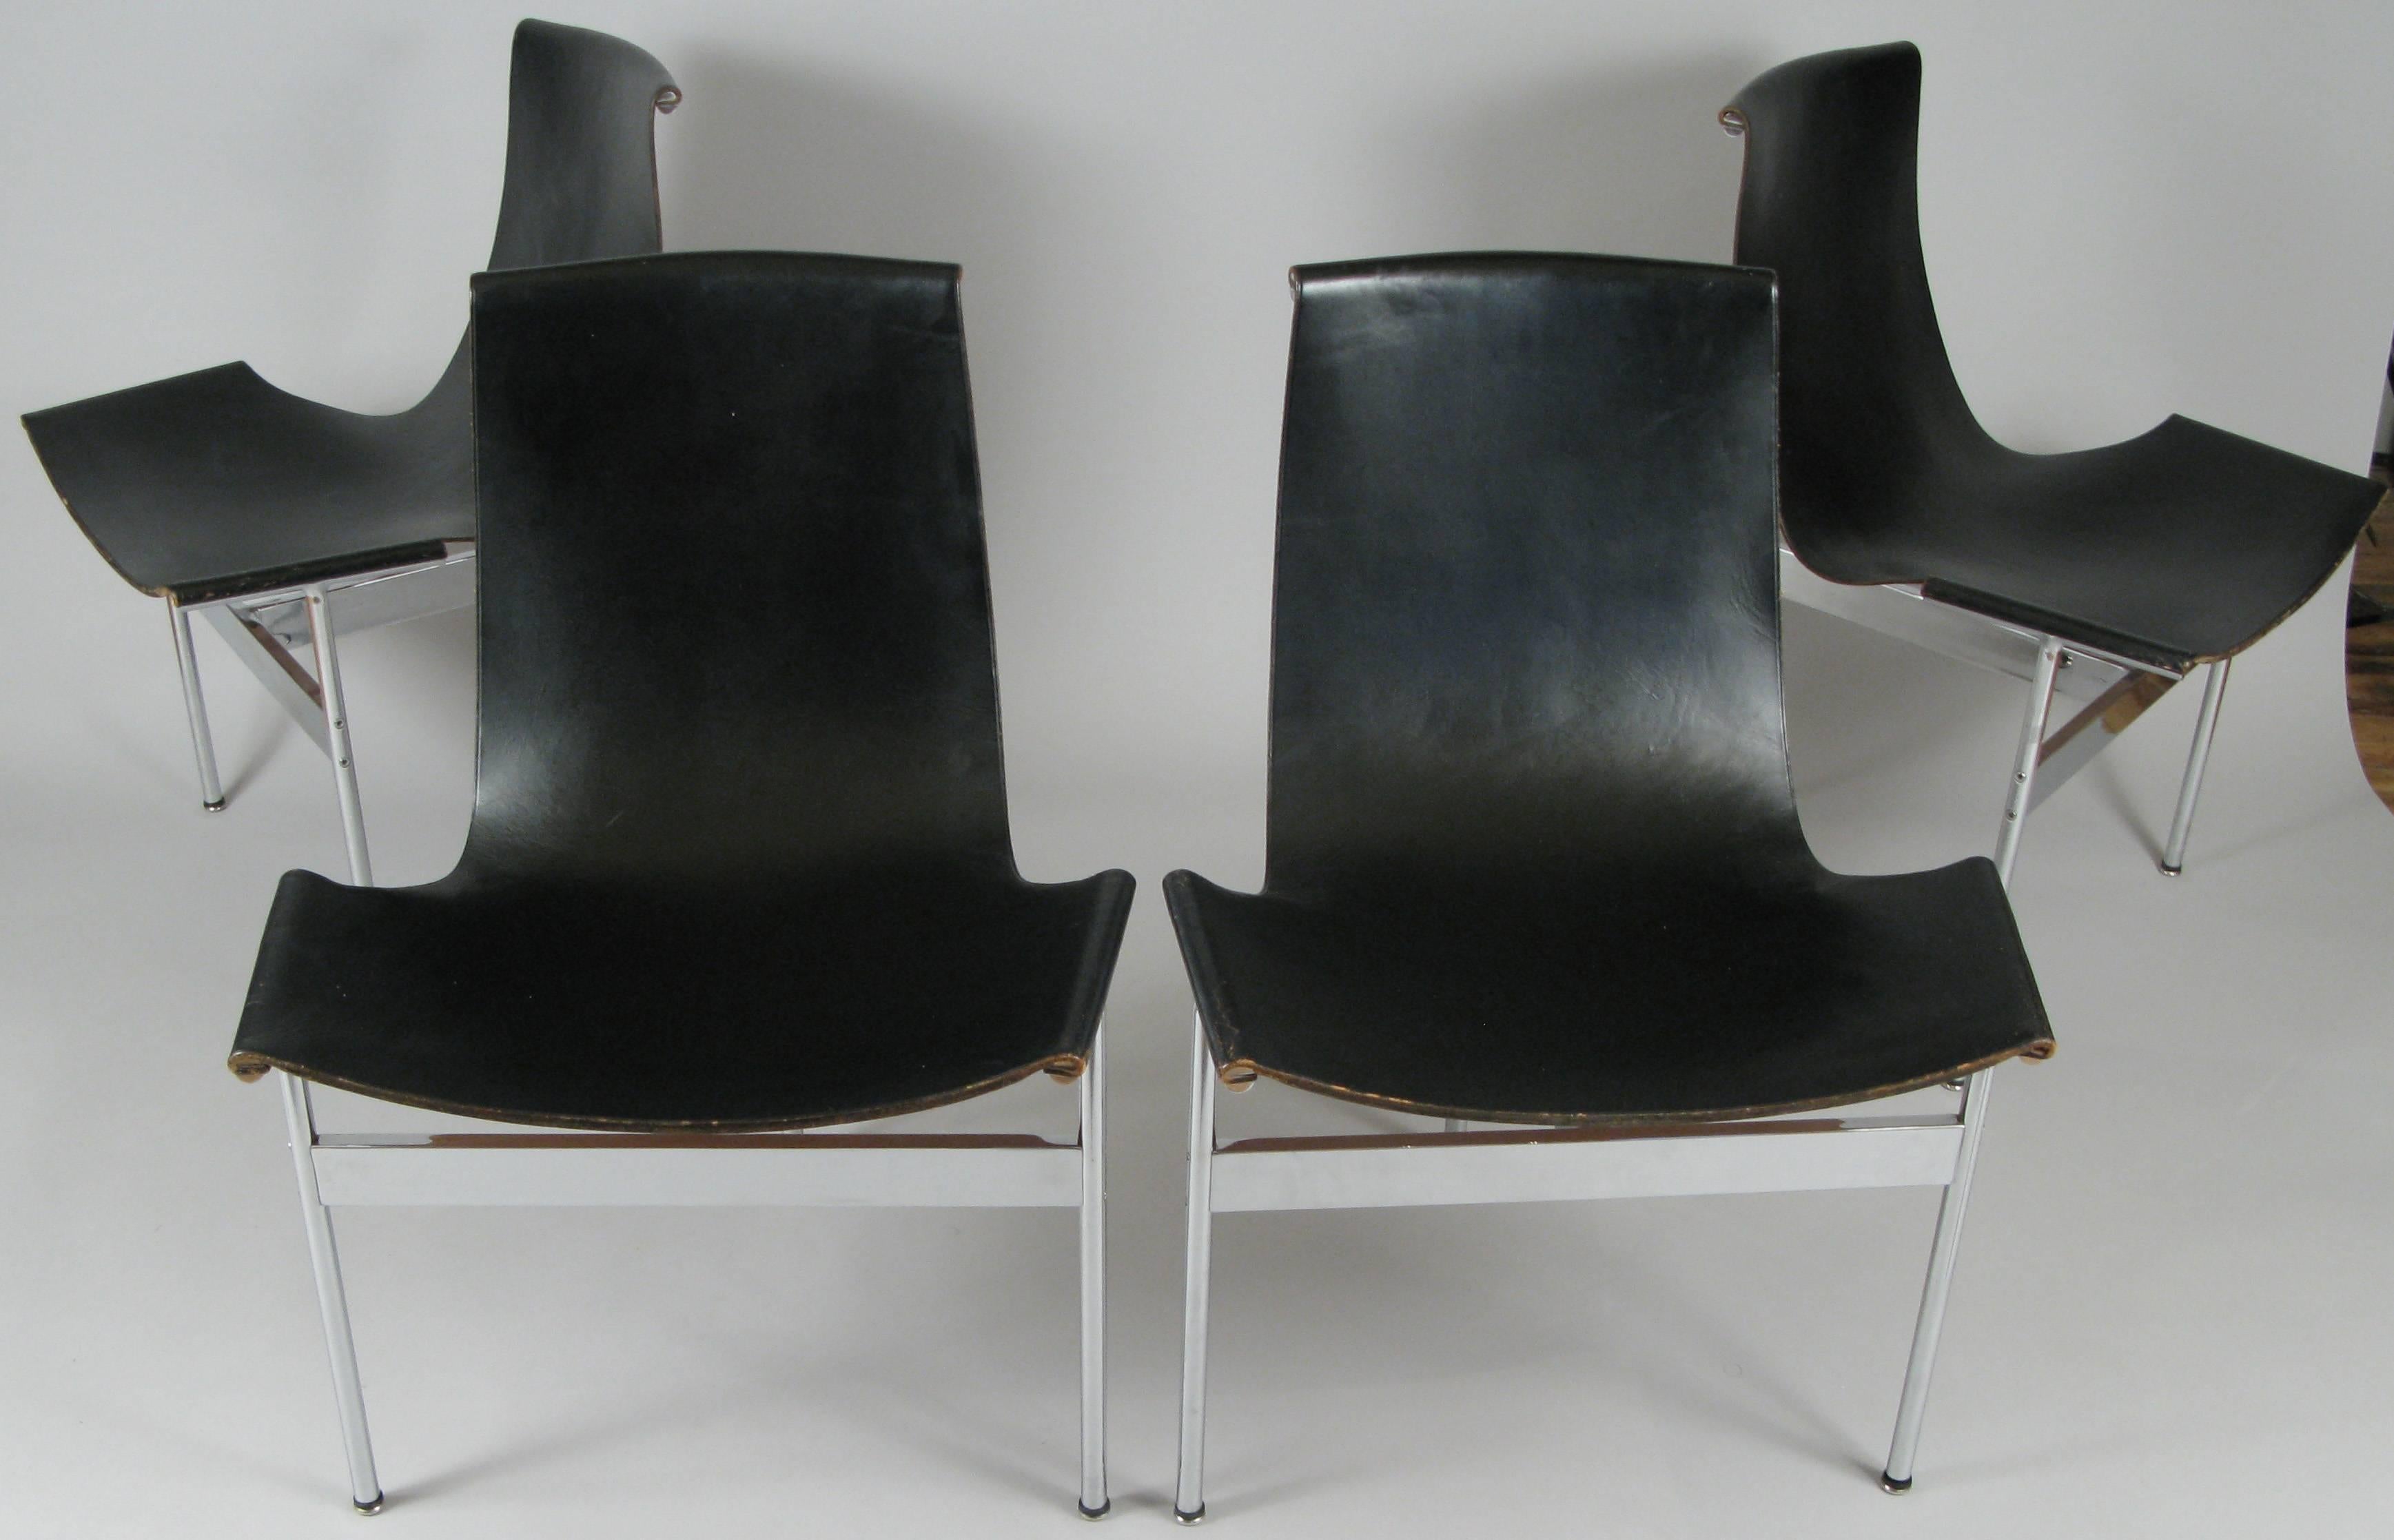 A very nice matched set of four Classic and iconic vintage 1970s 'T' chairs designed by Katavolos, Kelly and Littell for Laverne International. Beautiful design with a chromed steel frame and very handsome seats in their original black saddle